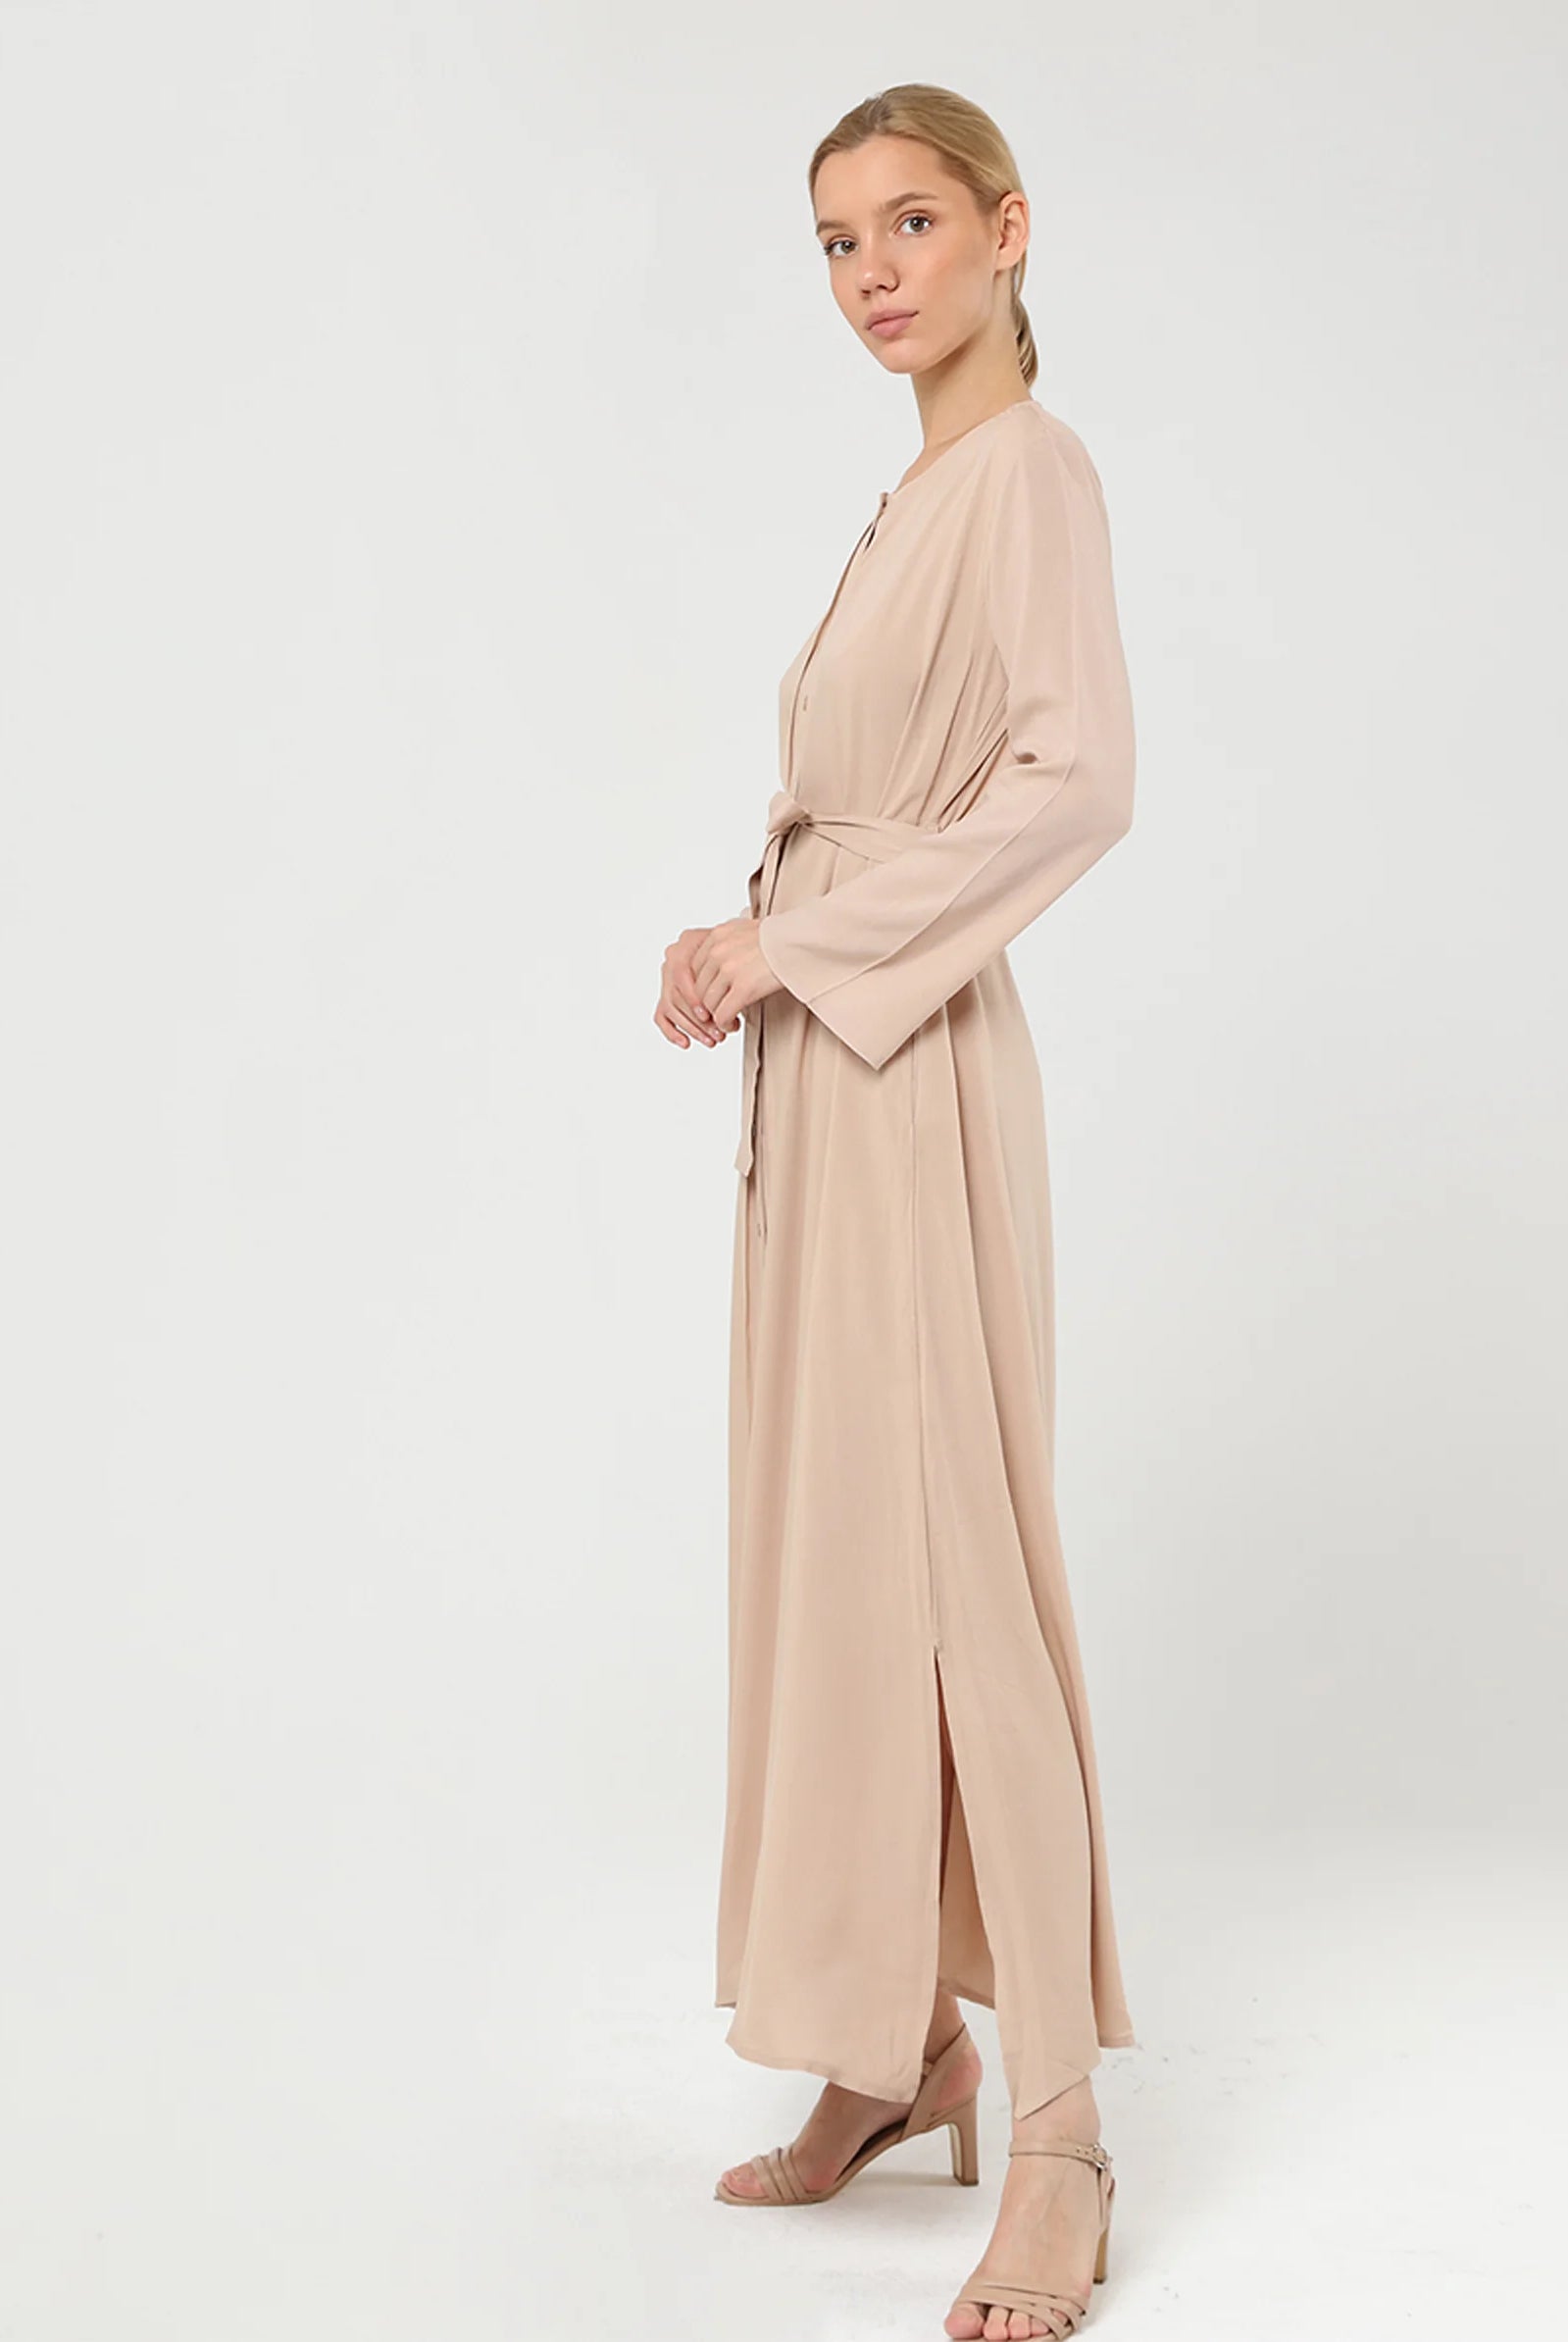 beige dress with sleeves